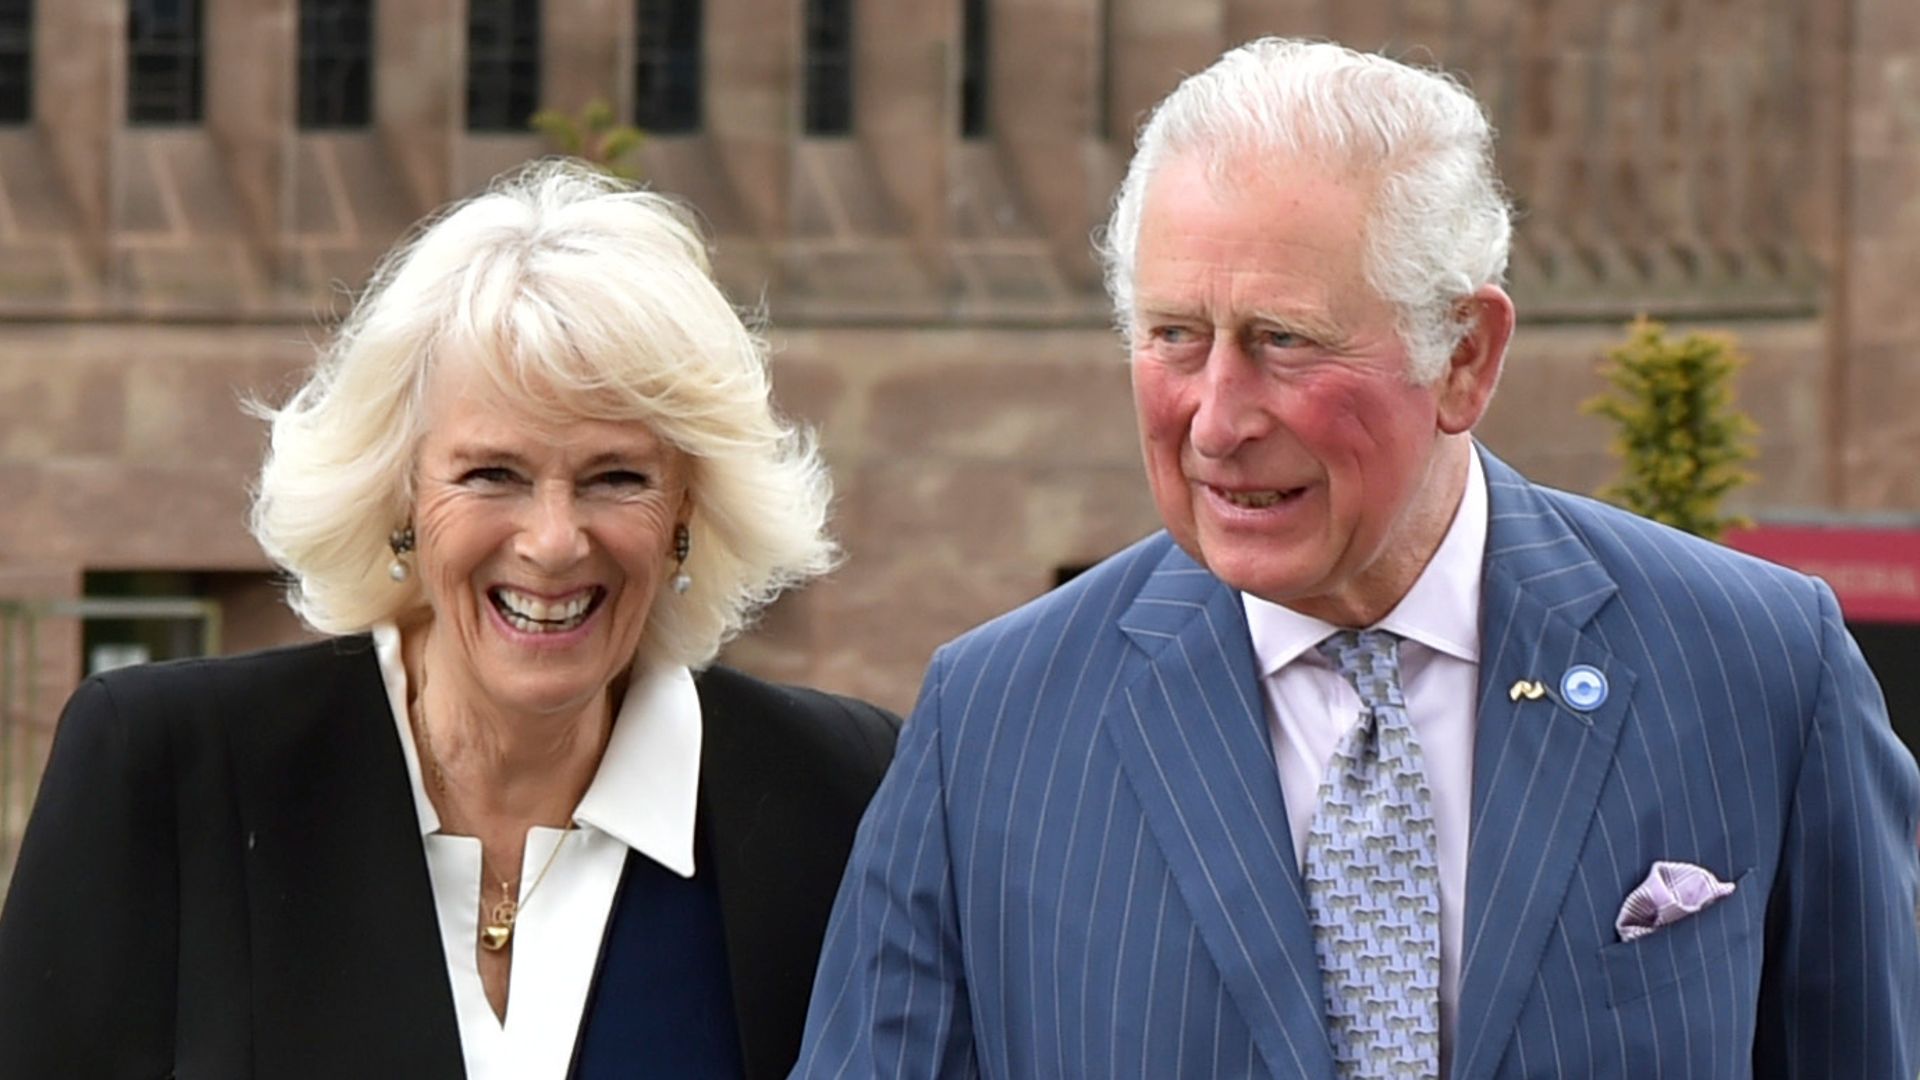 King Charles and Queen Camilla walking